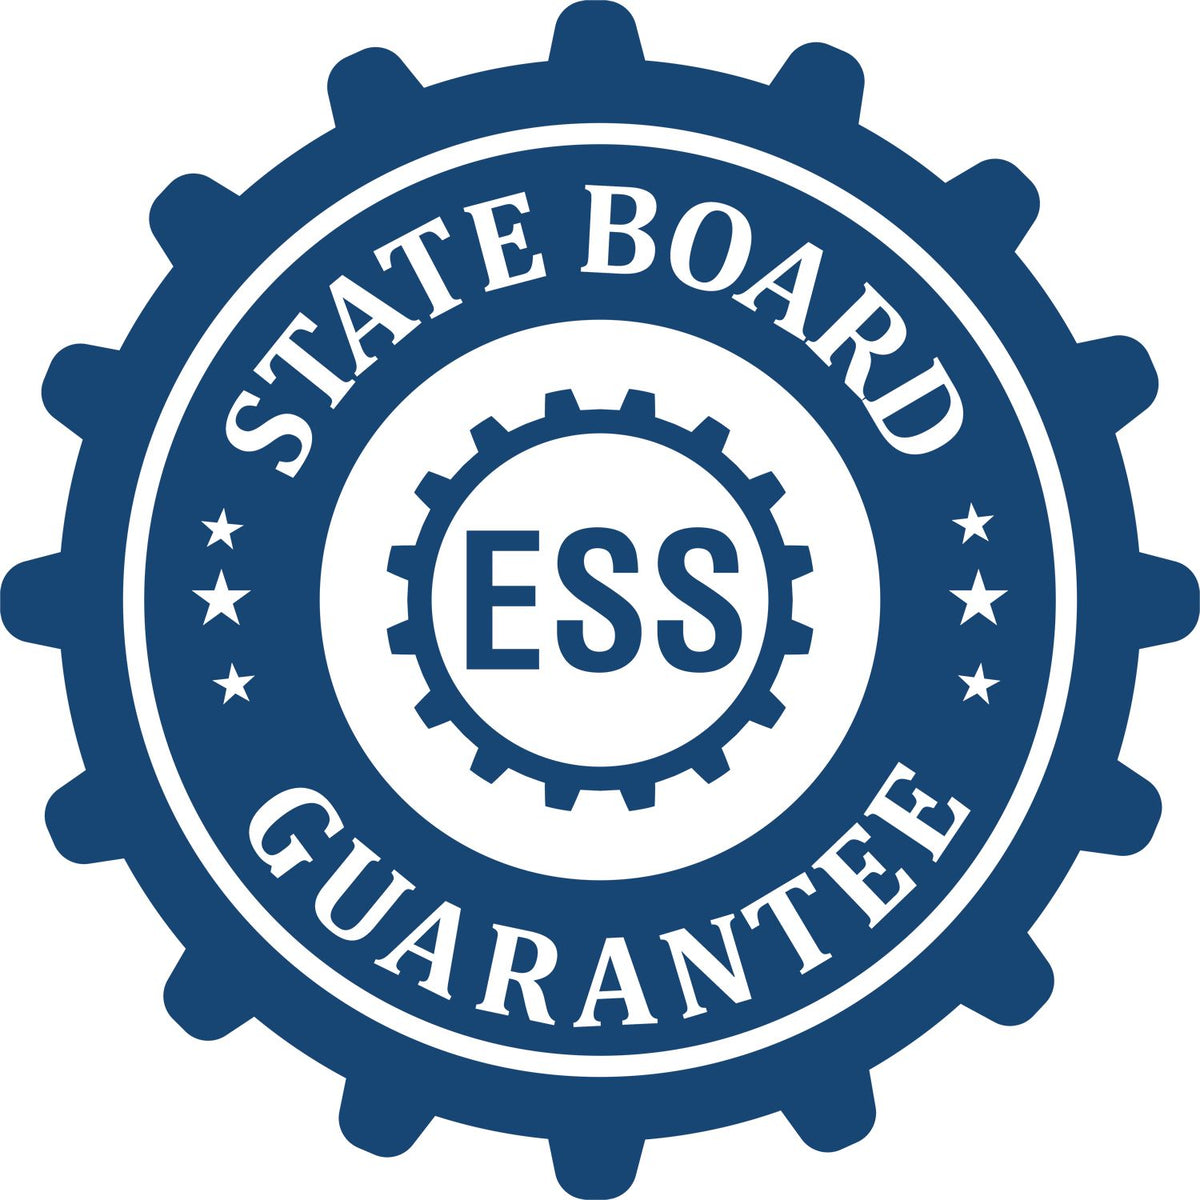 An emblem in a gear shape illustrating a state board guarantee for the Hybrid Alaska Geologist Seal